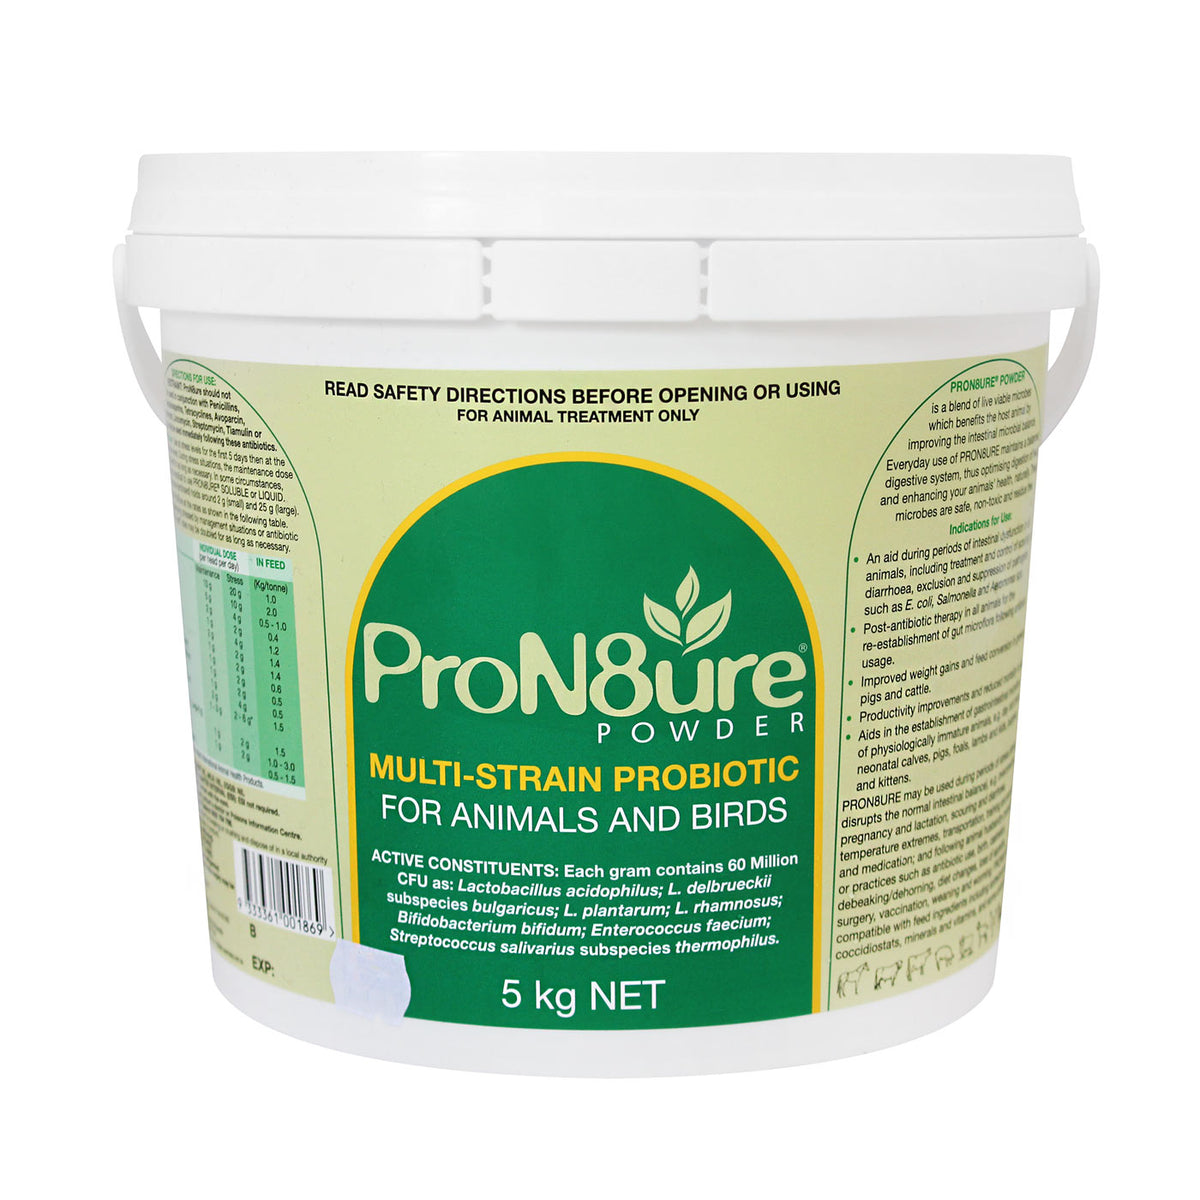 ProN8ure (formerly Protexin) Probiotic Powder